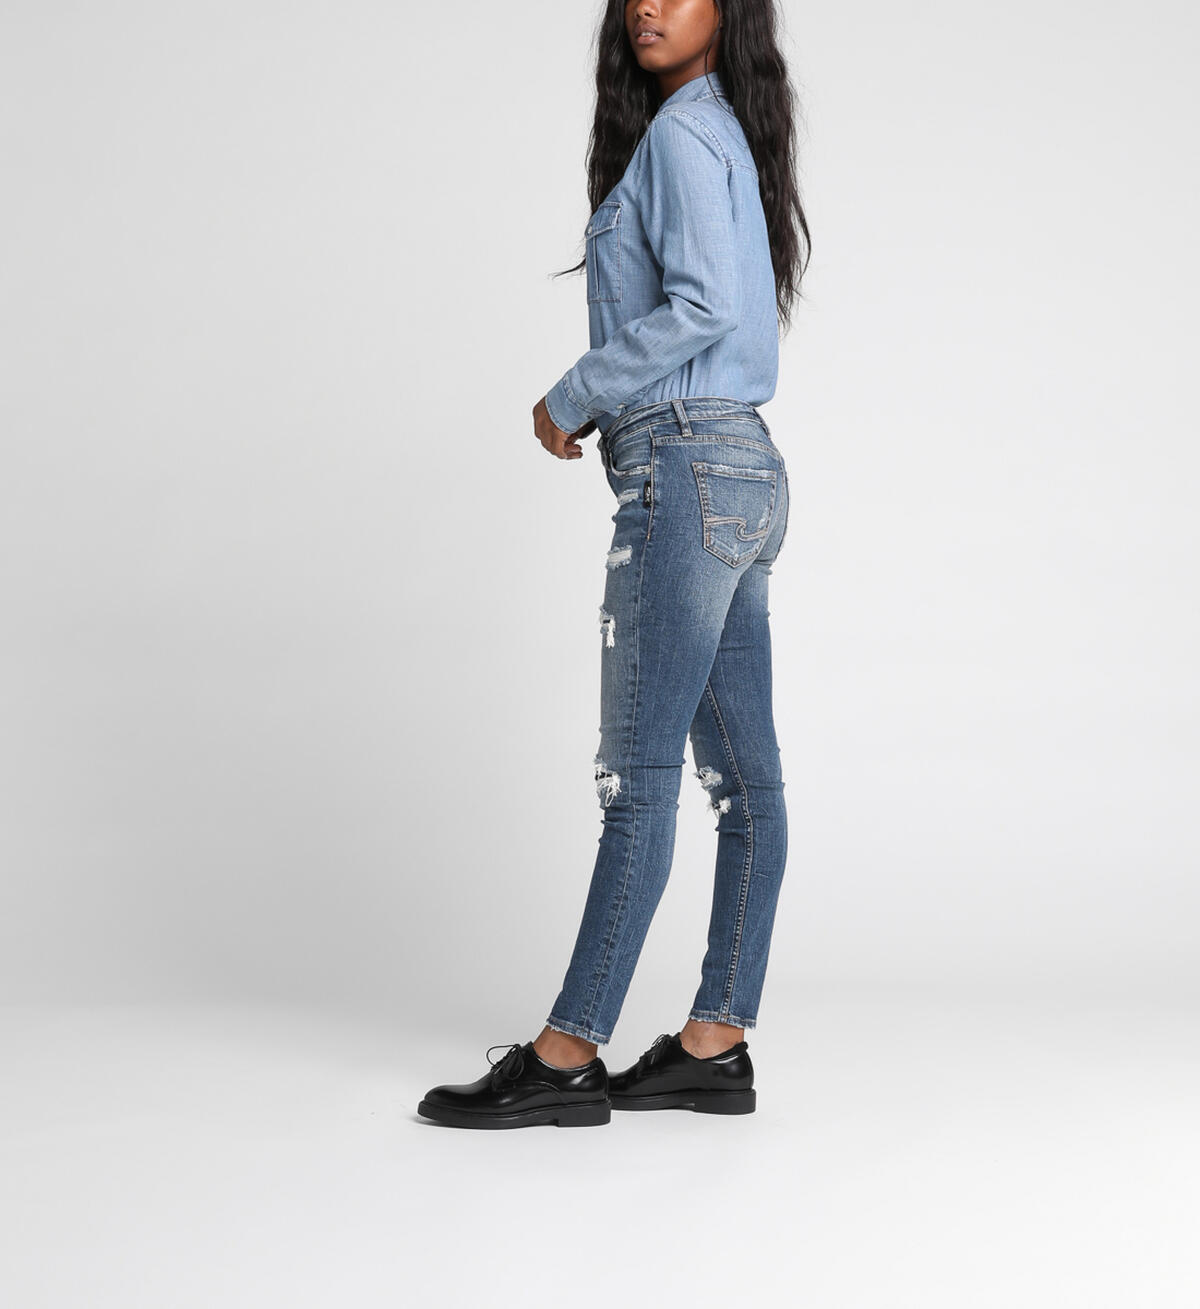 Aiko Mid-Rise Skinny Patched Jeans, , hi-res image number 2